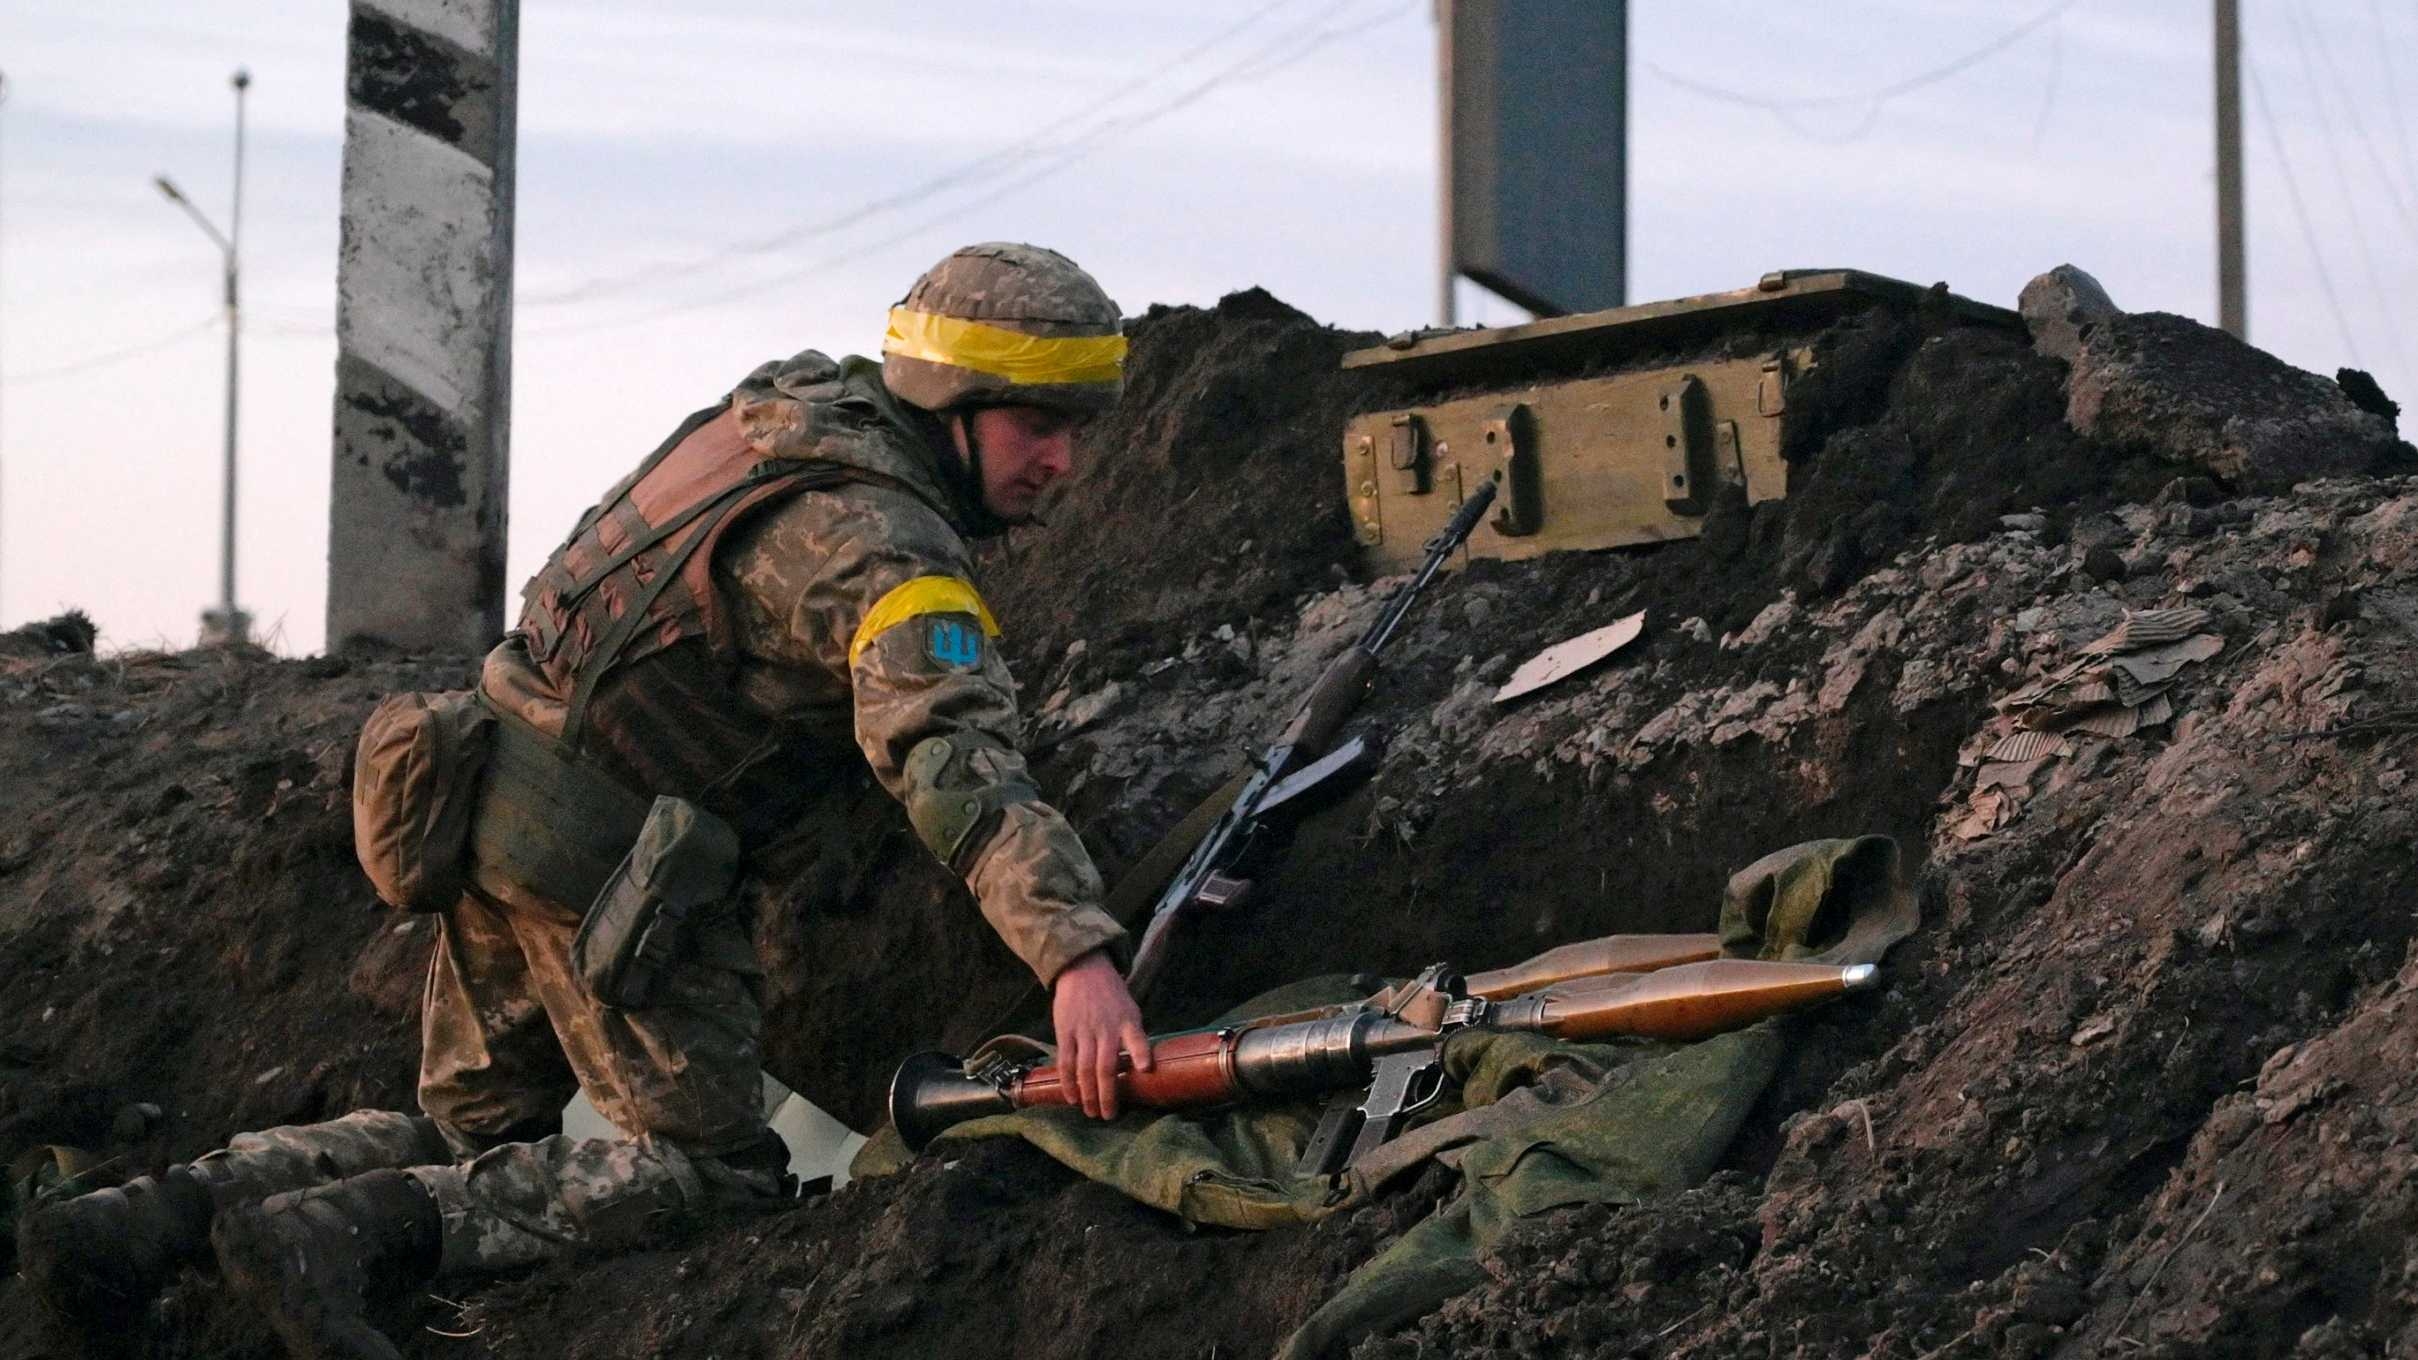 A Ukrainian serviceman holds a rocket-propelled grenade launcher at fighting positions outside the city of Kharkiv, Ukraine on 24 February 2022.